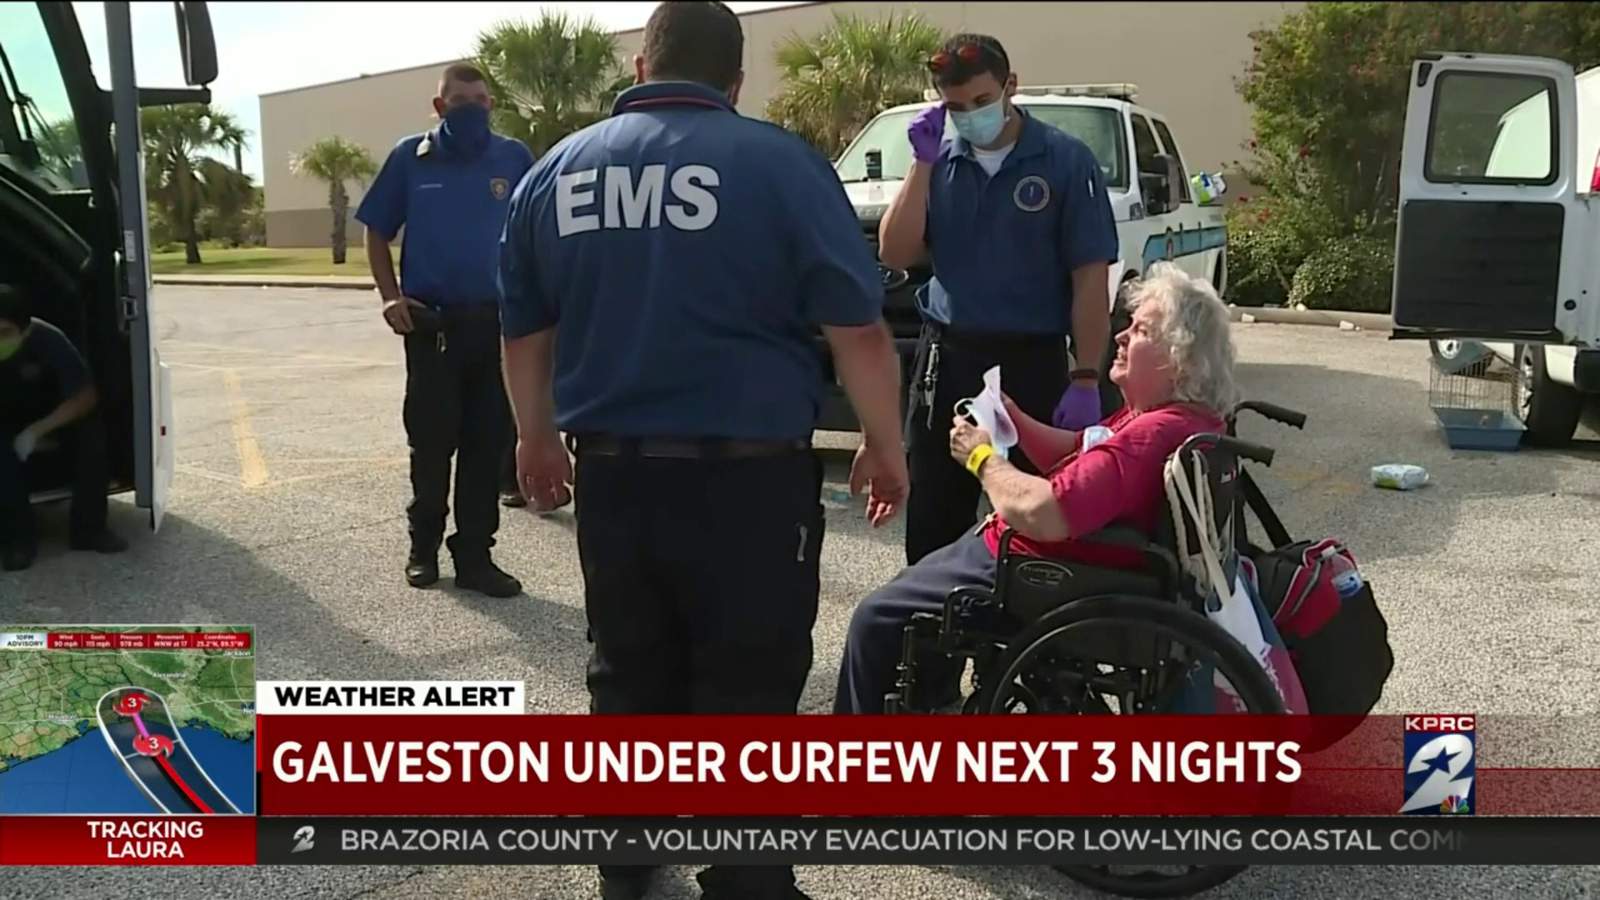 City of Galveston imposes curfew for next 3 nights; violators could face $1,000 fine